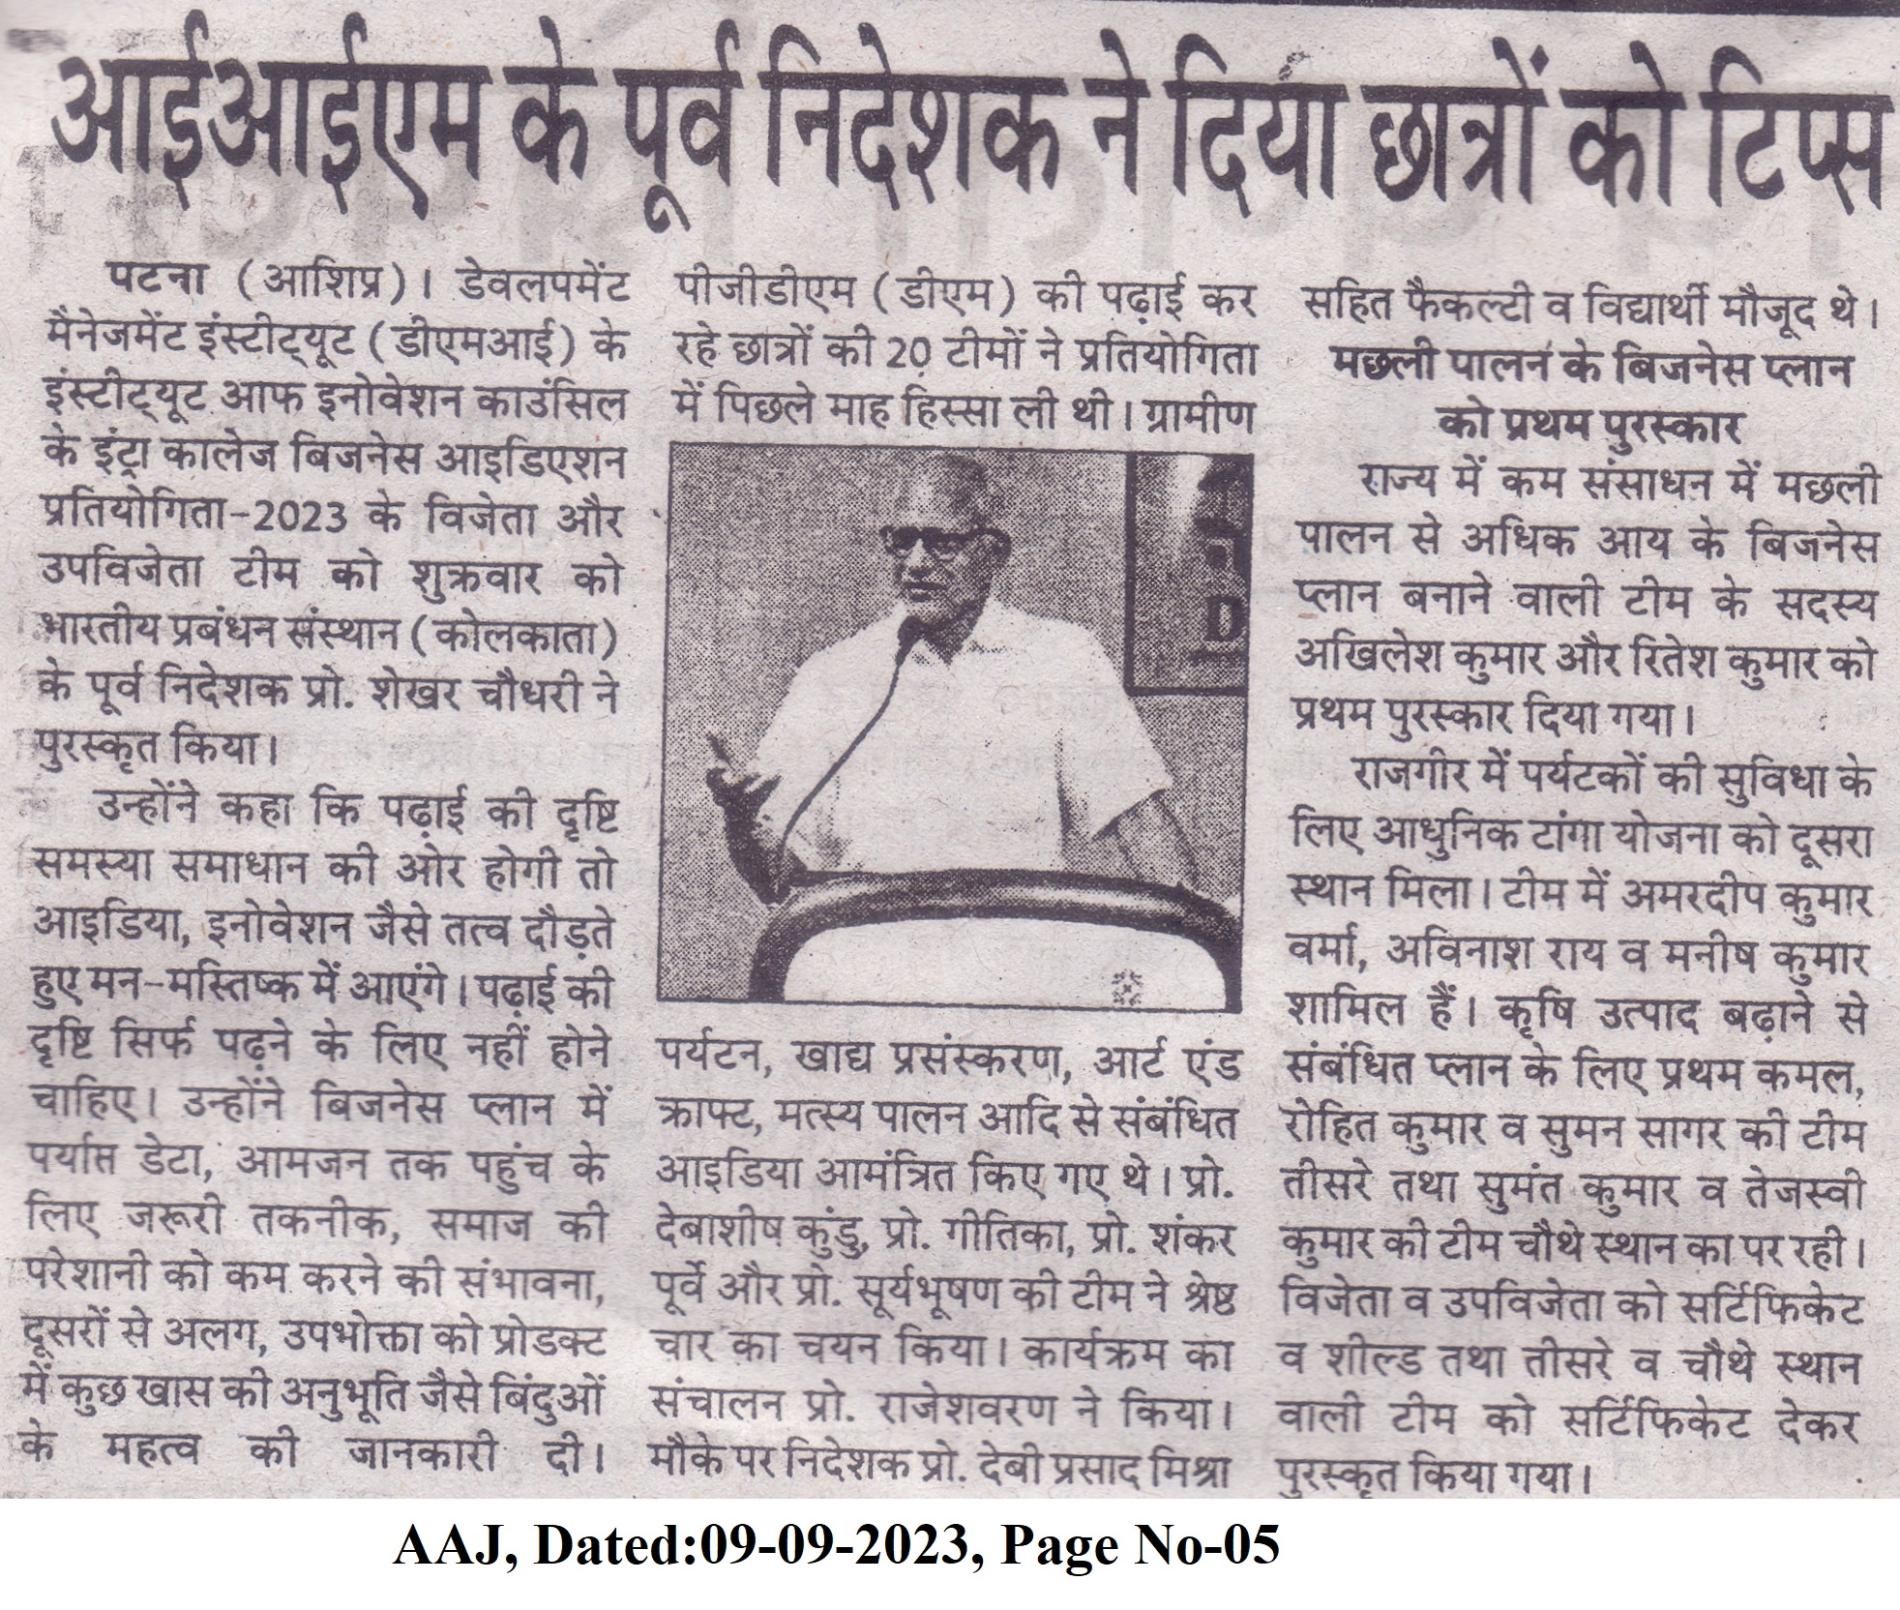 AAJ dated09-09-2023, Page No-05